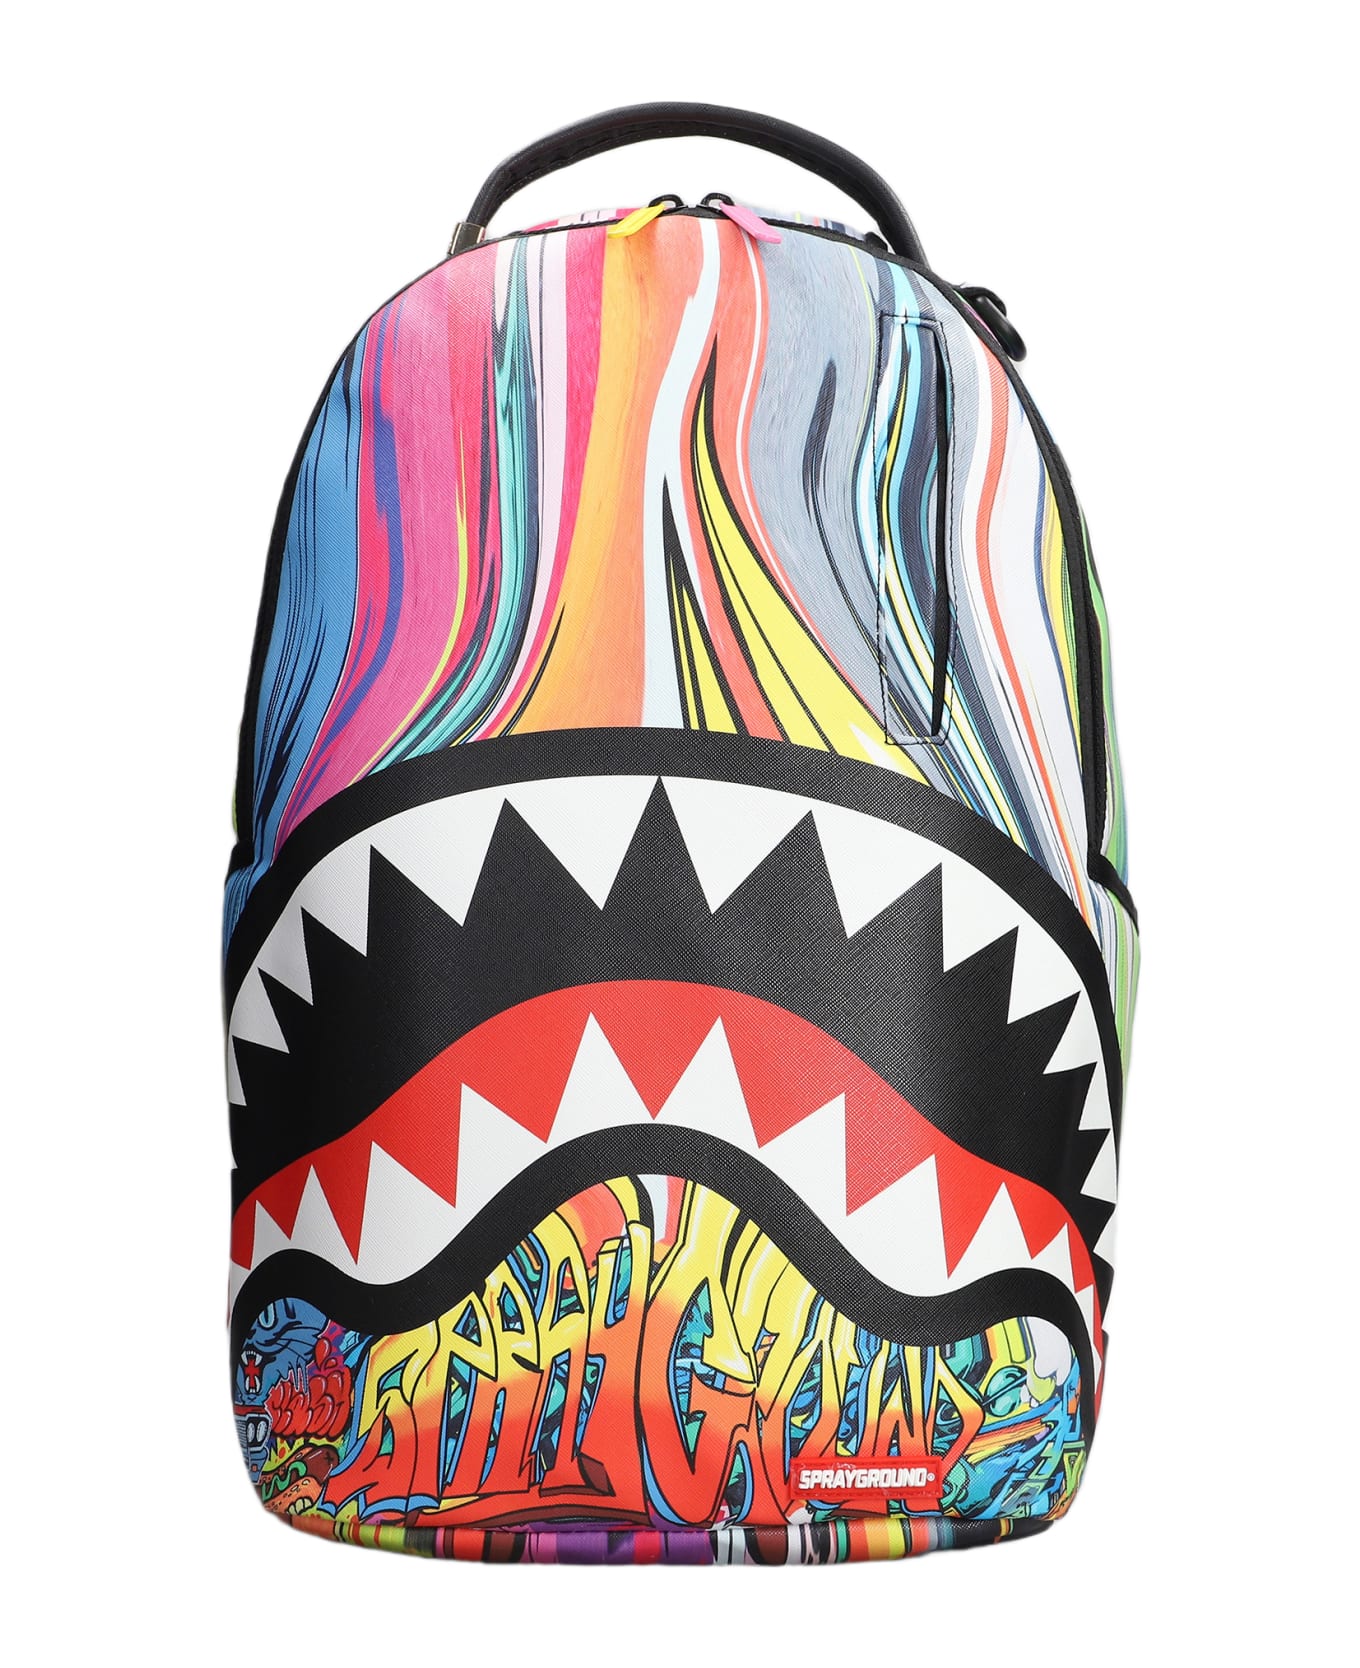 Sprayground Backpack In Multicolor Pvc - Multicolor バックパック